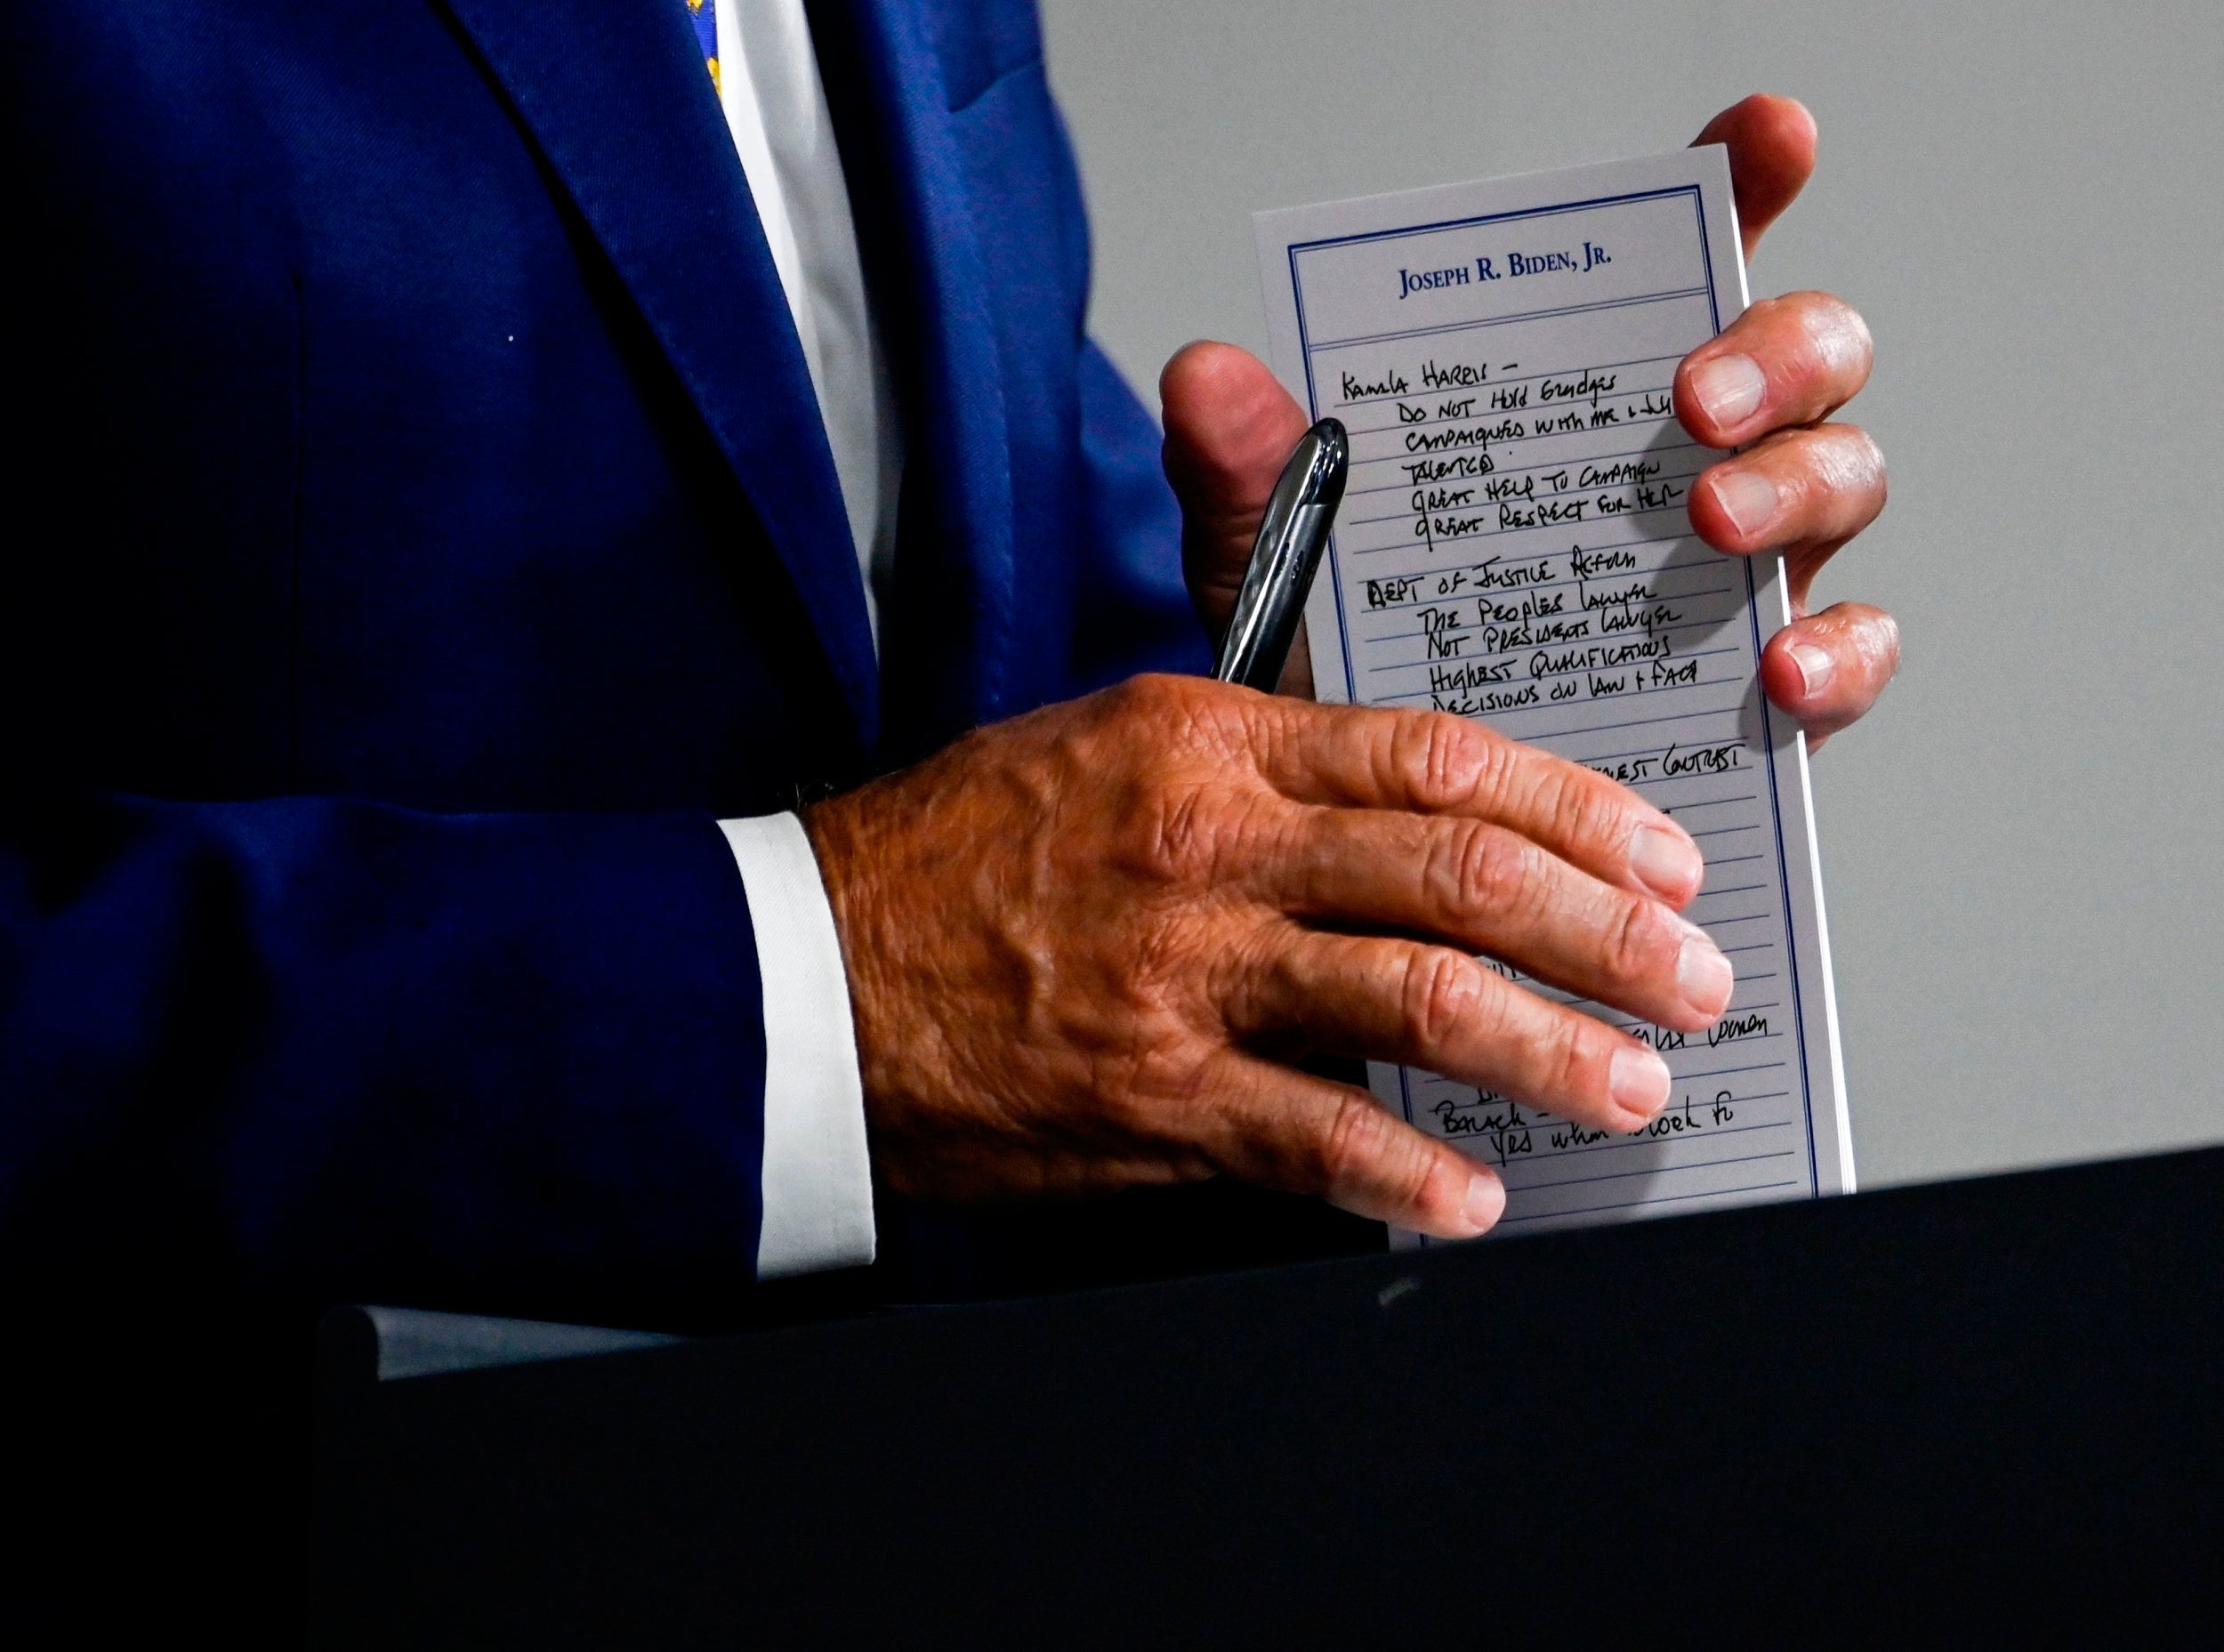 Biden's notes about Harris were photographed at a conference in Delaware this week